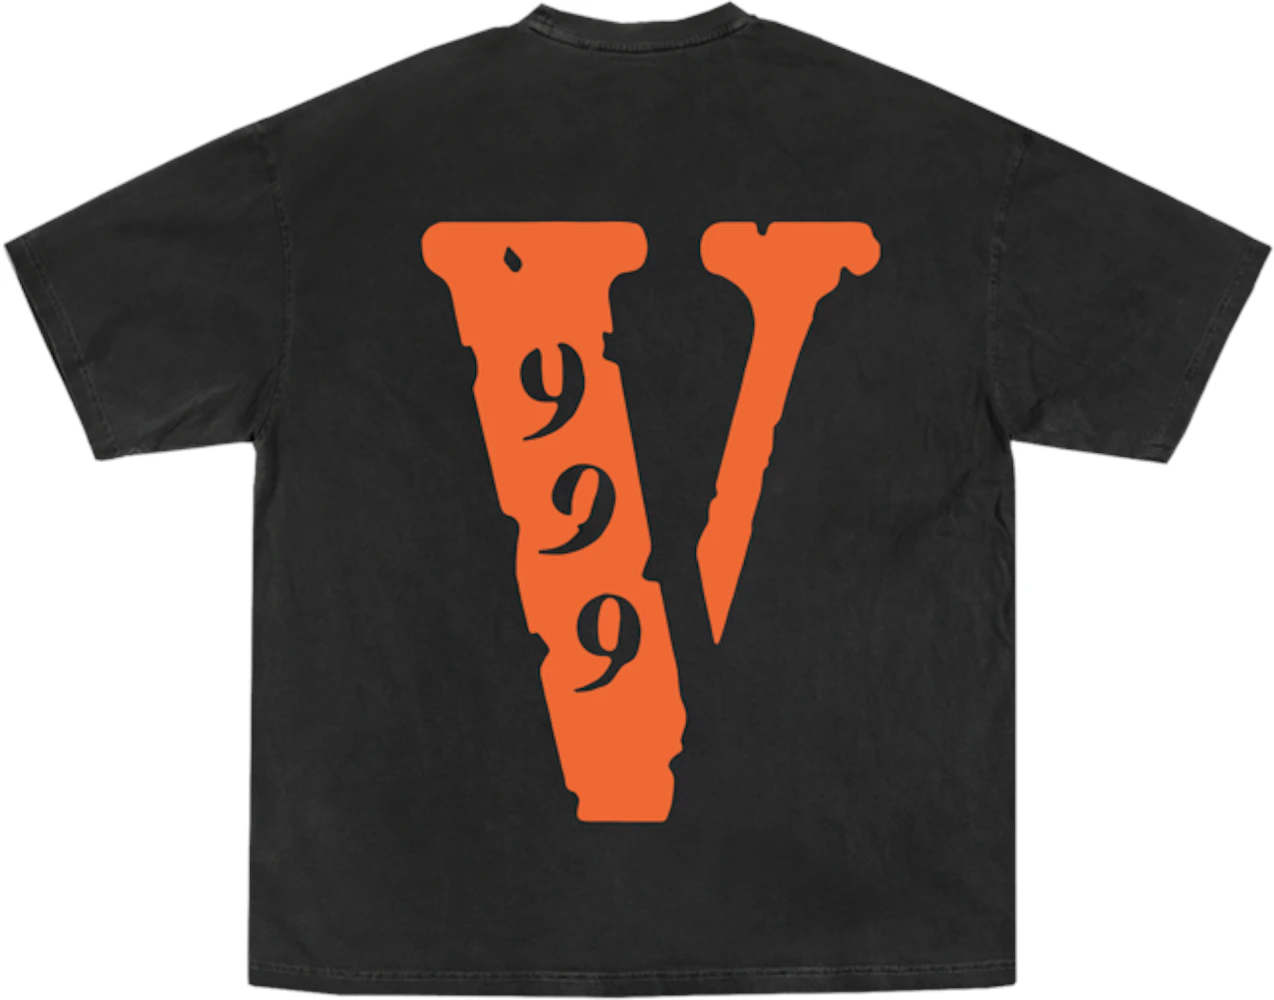 VLONE X Juice WRLD Shirt, Has never been worn and has stayed in the ...